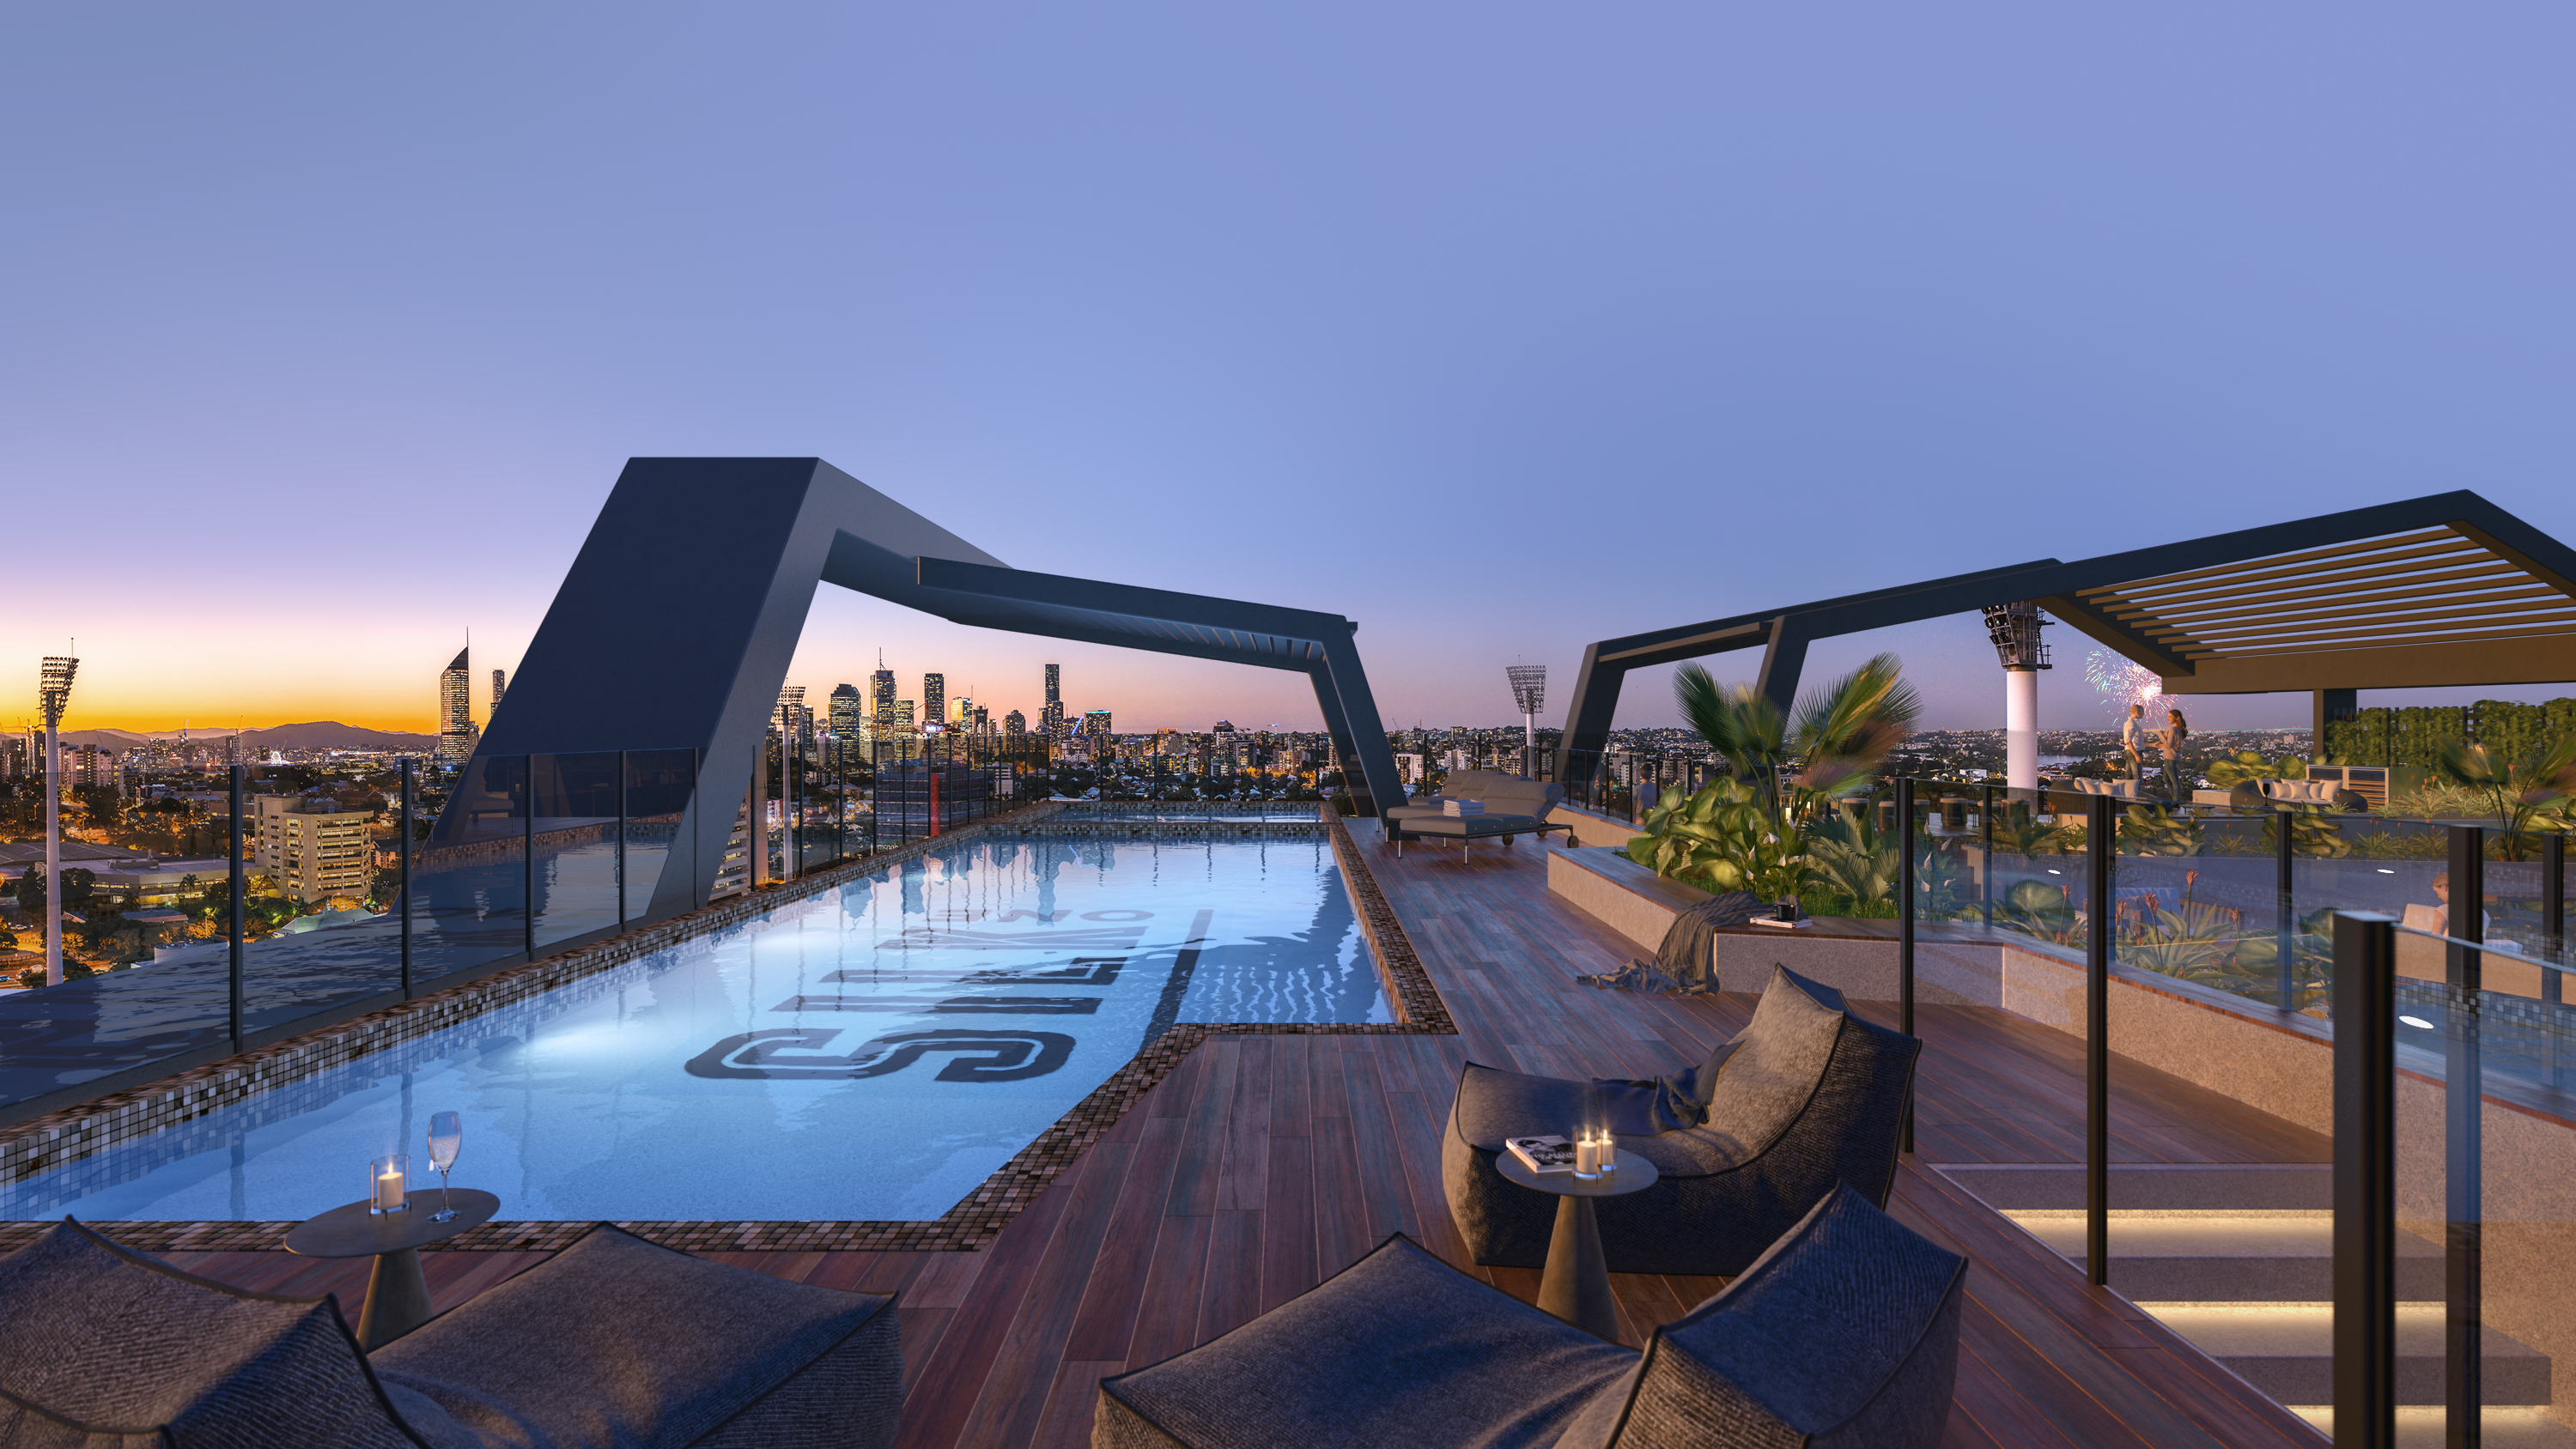 Silk One Pool (render provided by CBRE)